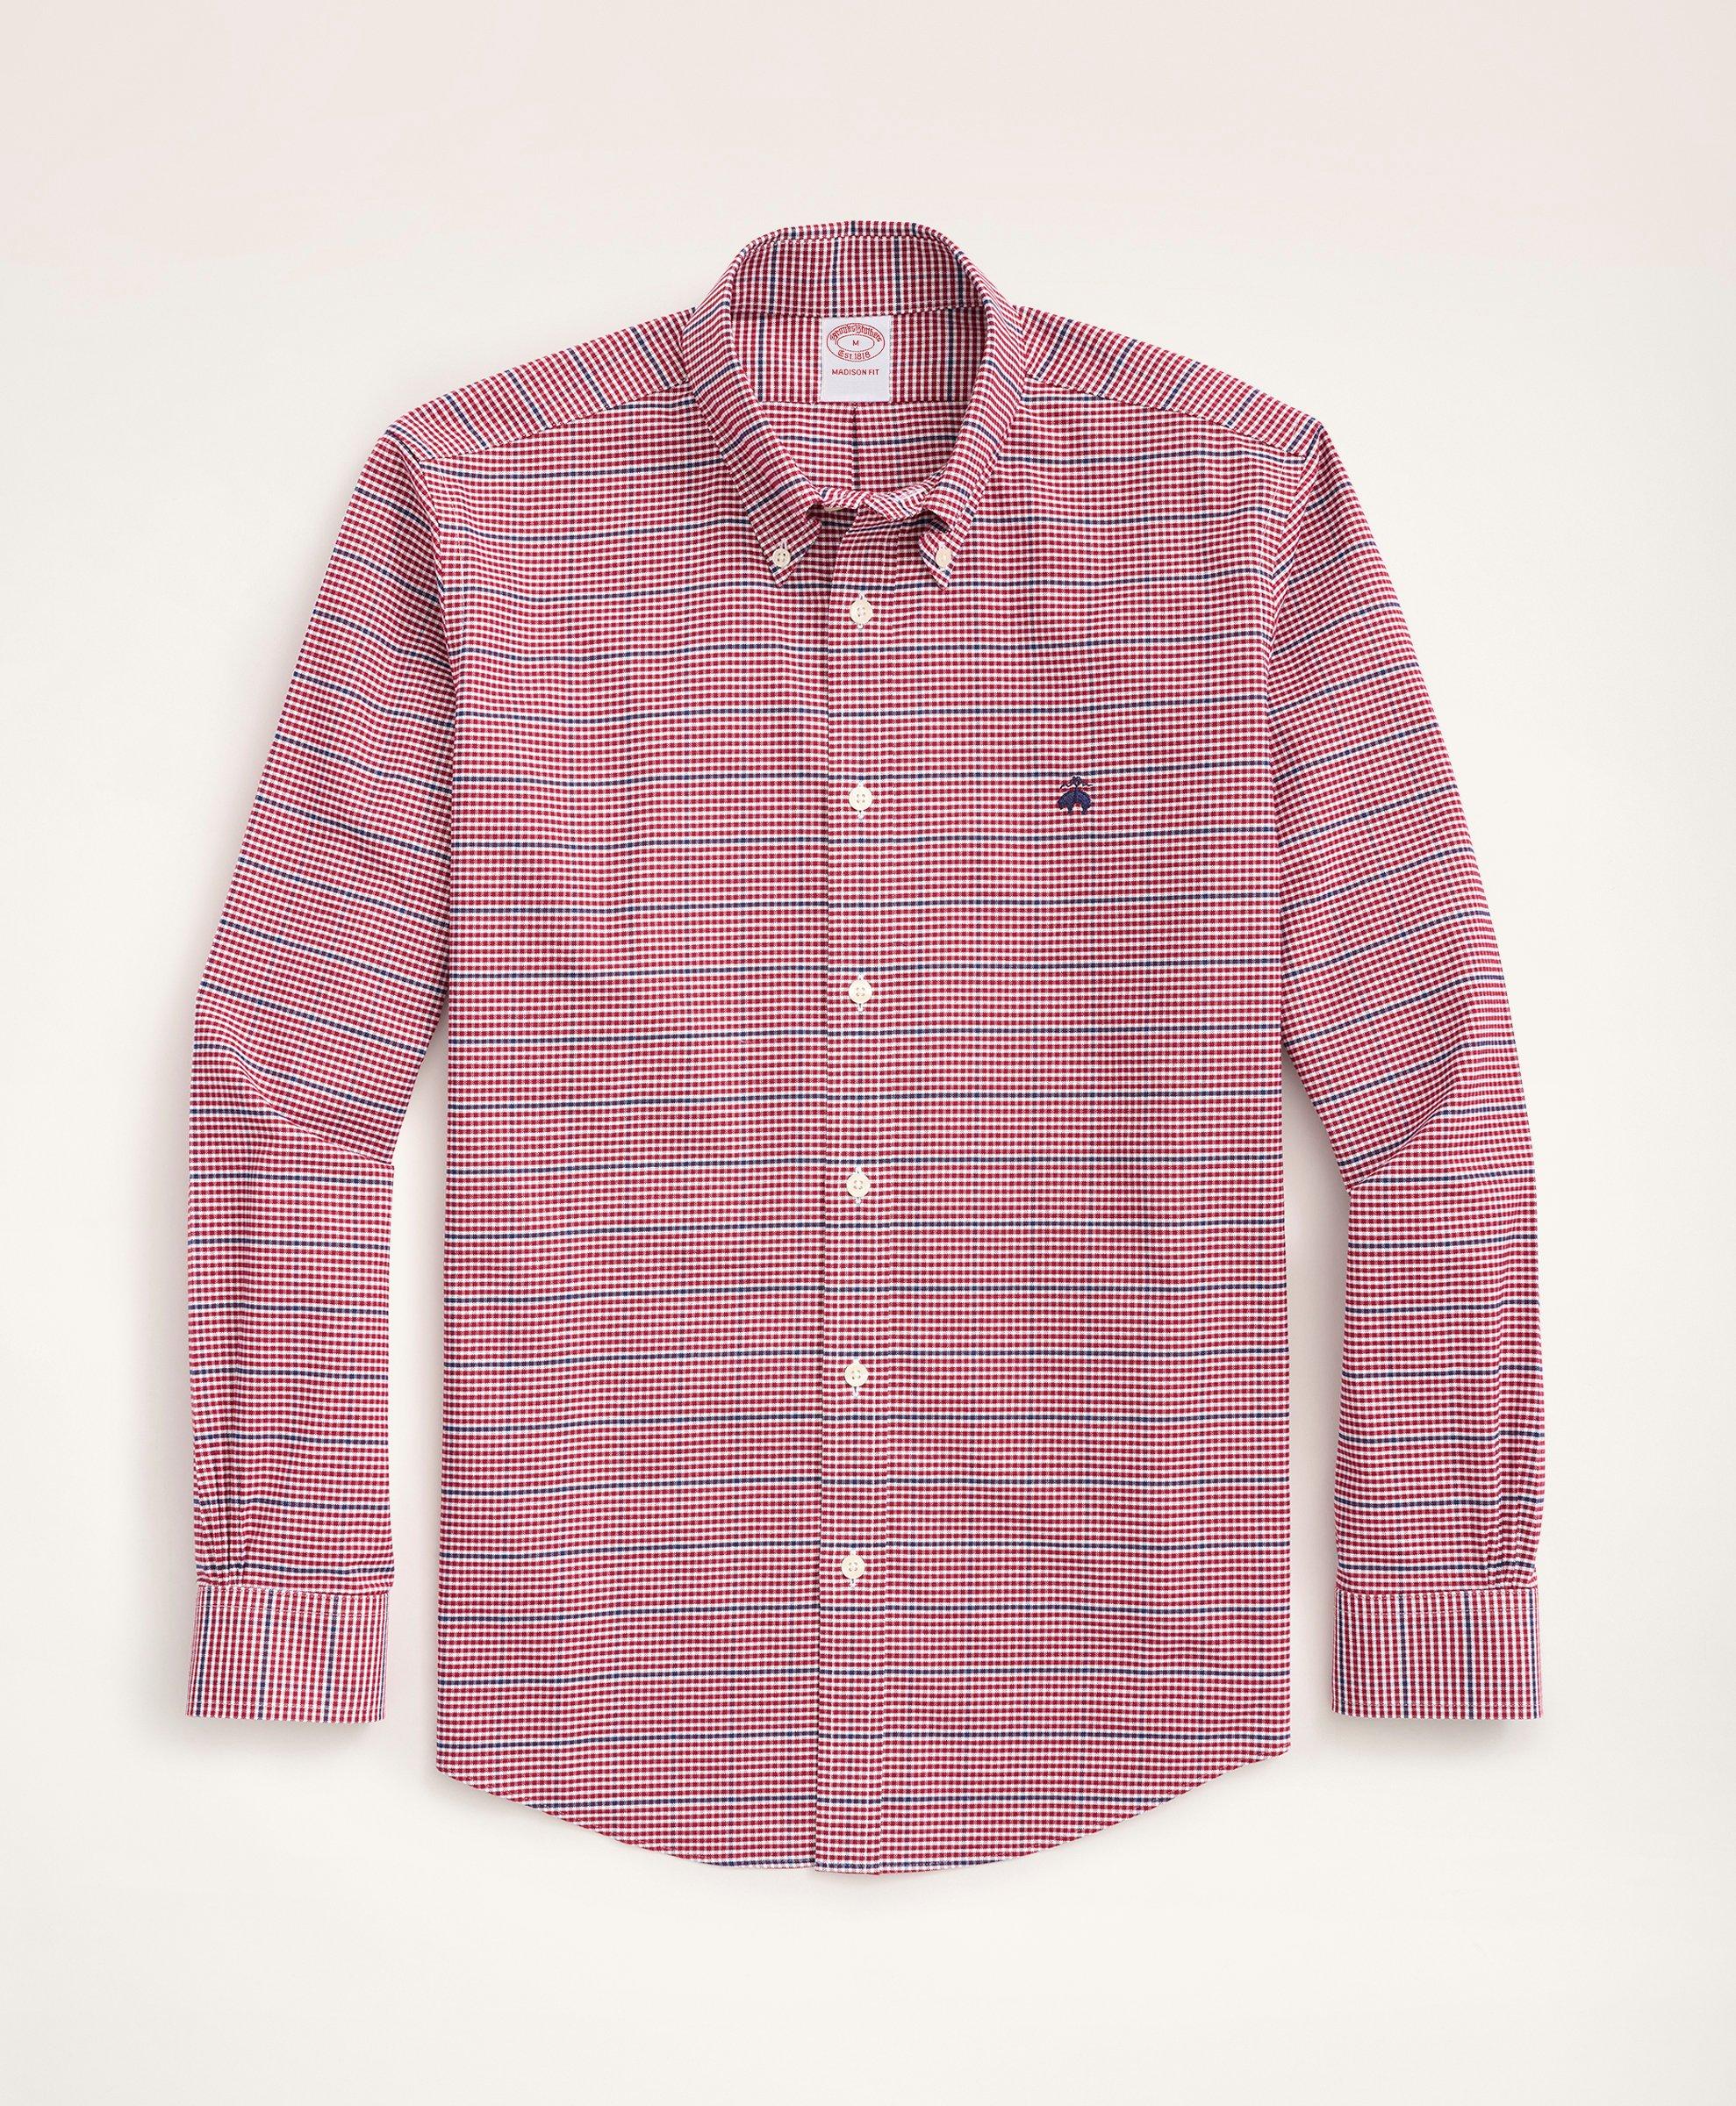 Stretch Madison Relaxed-Fit Sport Shirt, Non-Iron Oxford Button Down Collar Micro-Check, image 1